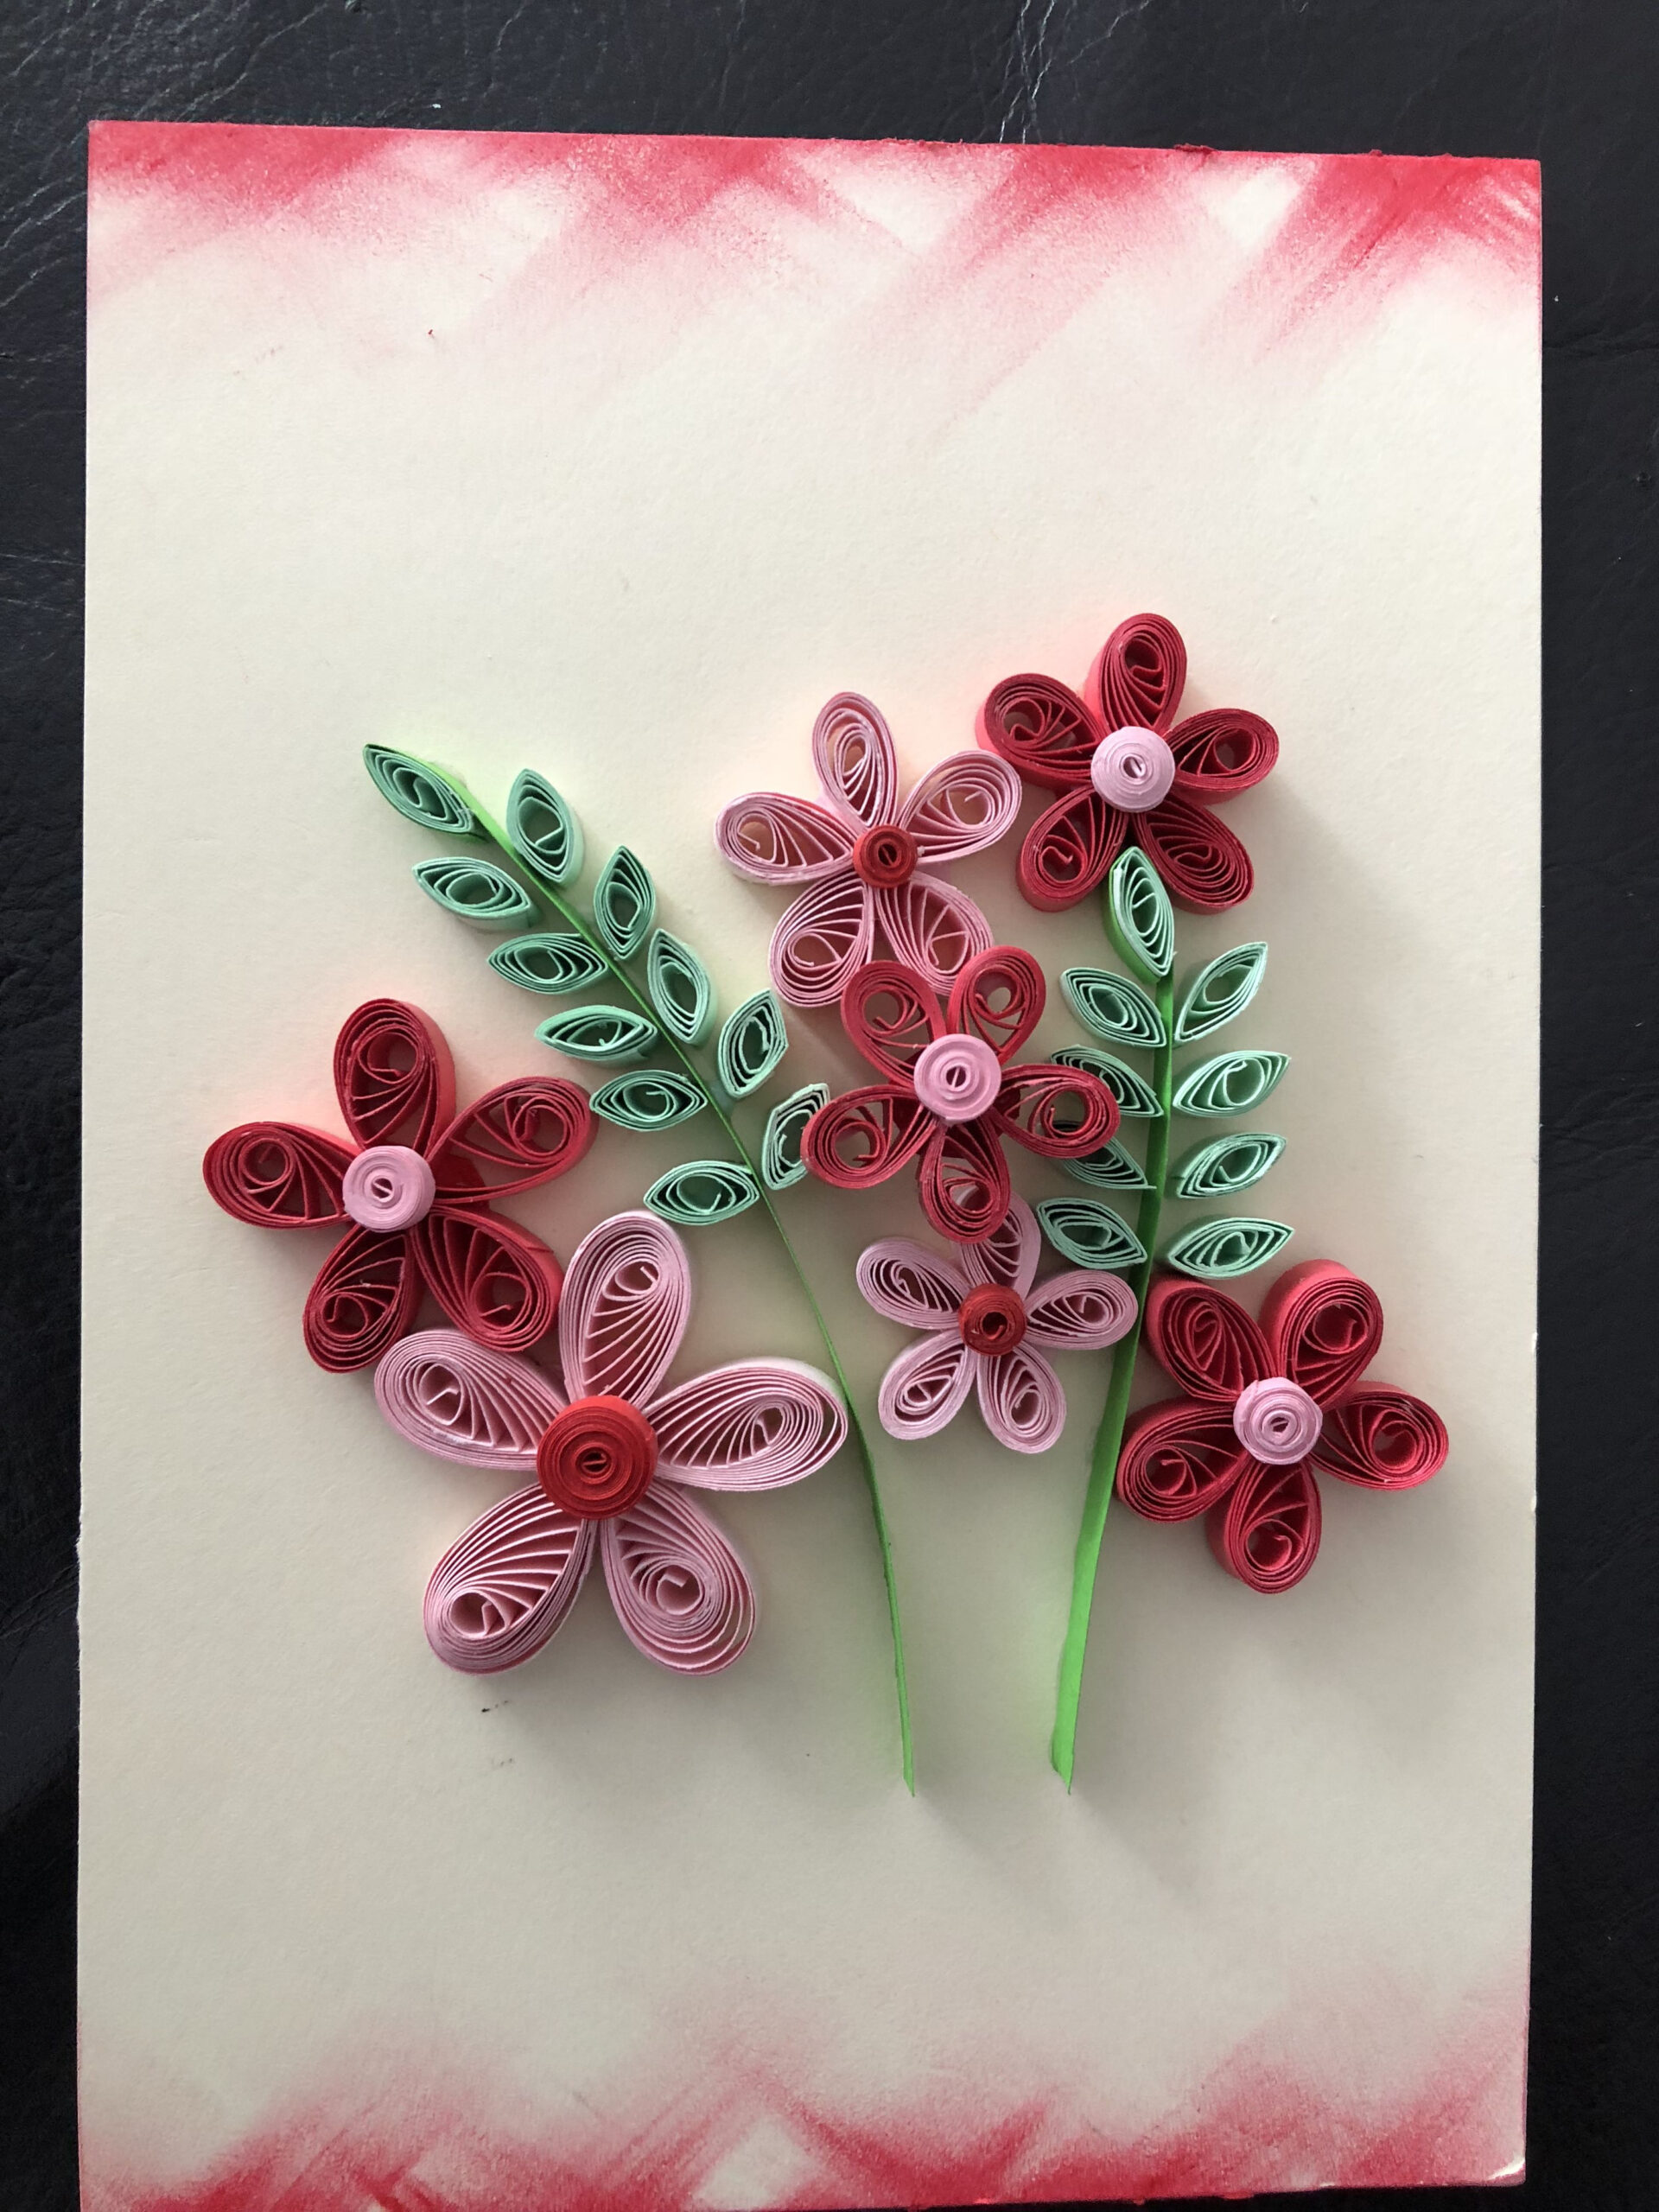 A Simple Quilling For Beginners Of Jujukwan s Quilling Interest Group 